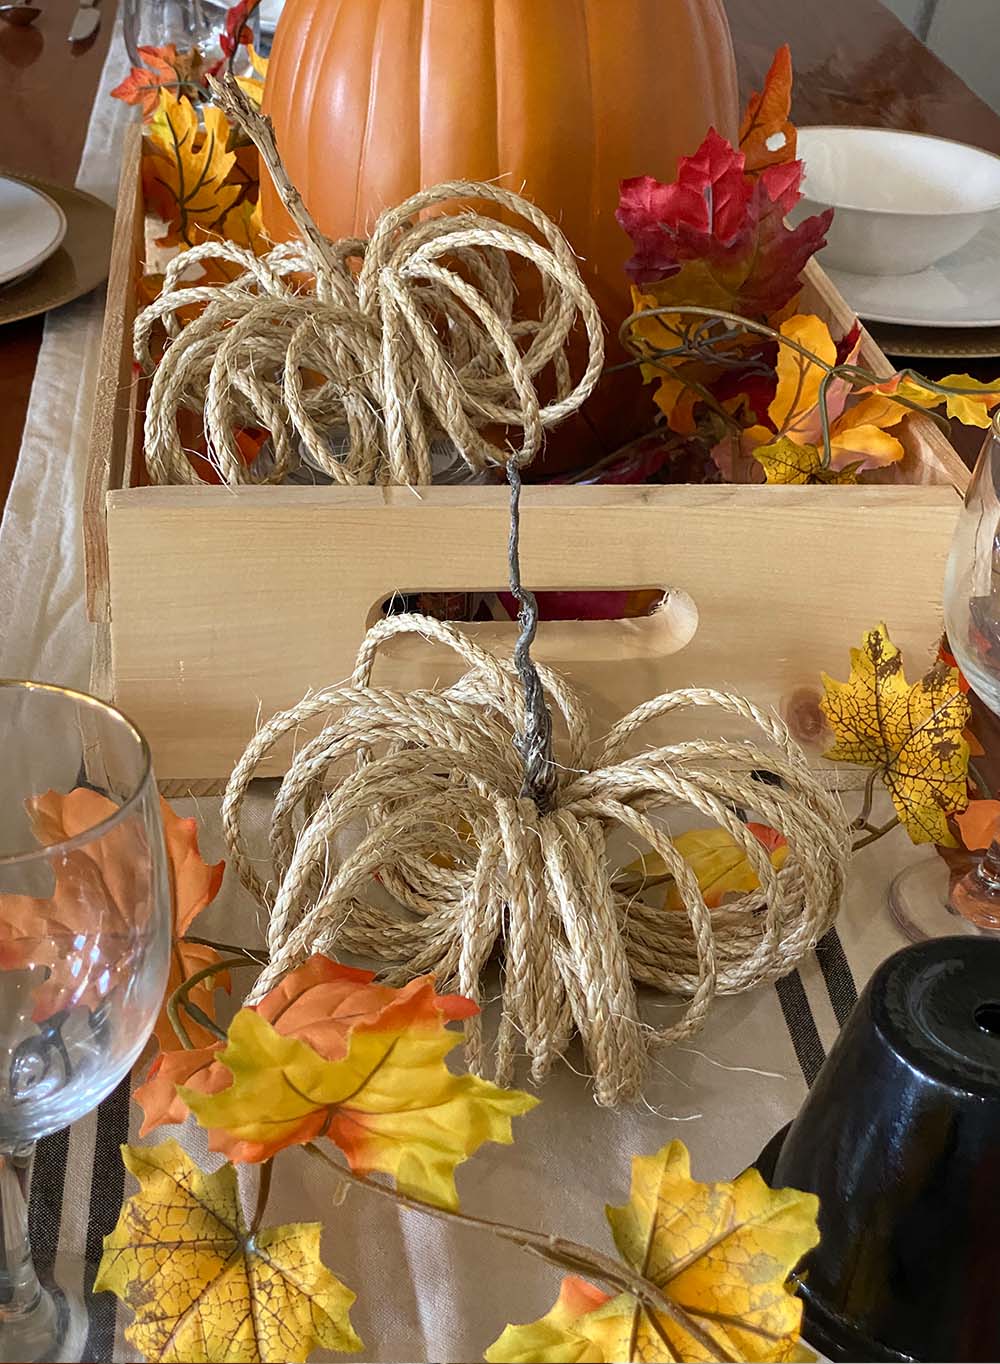 Wooden crate filled with thanksgiving decorations.